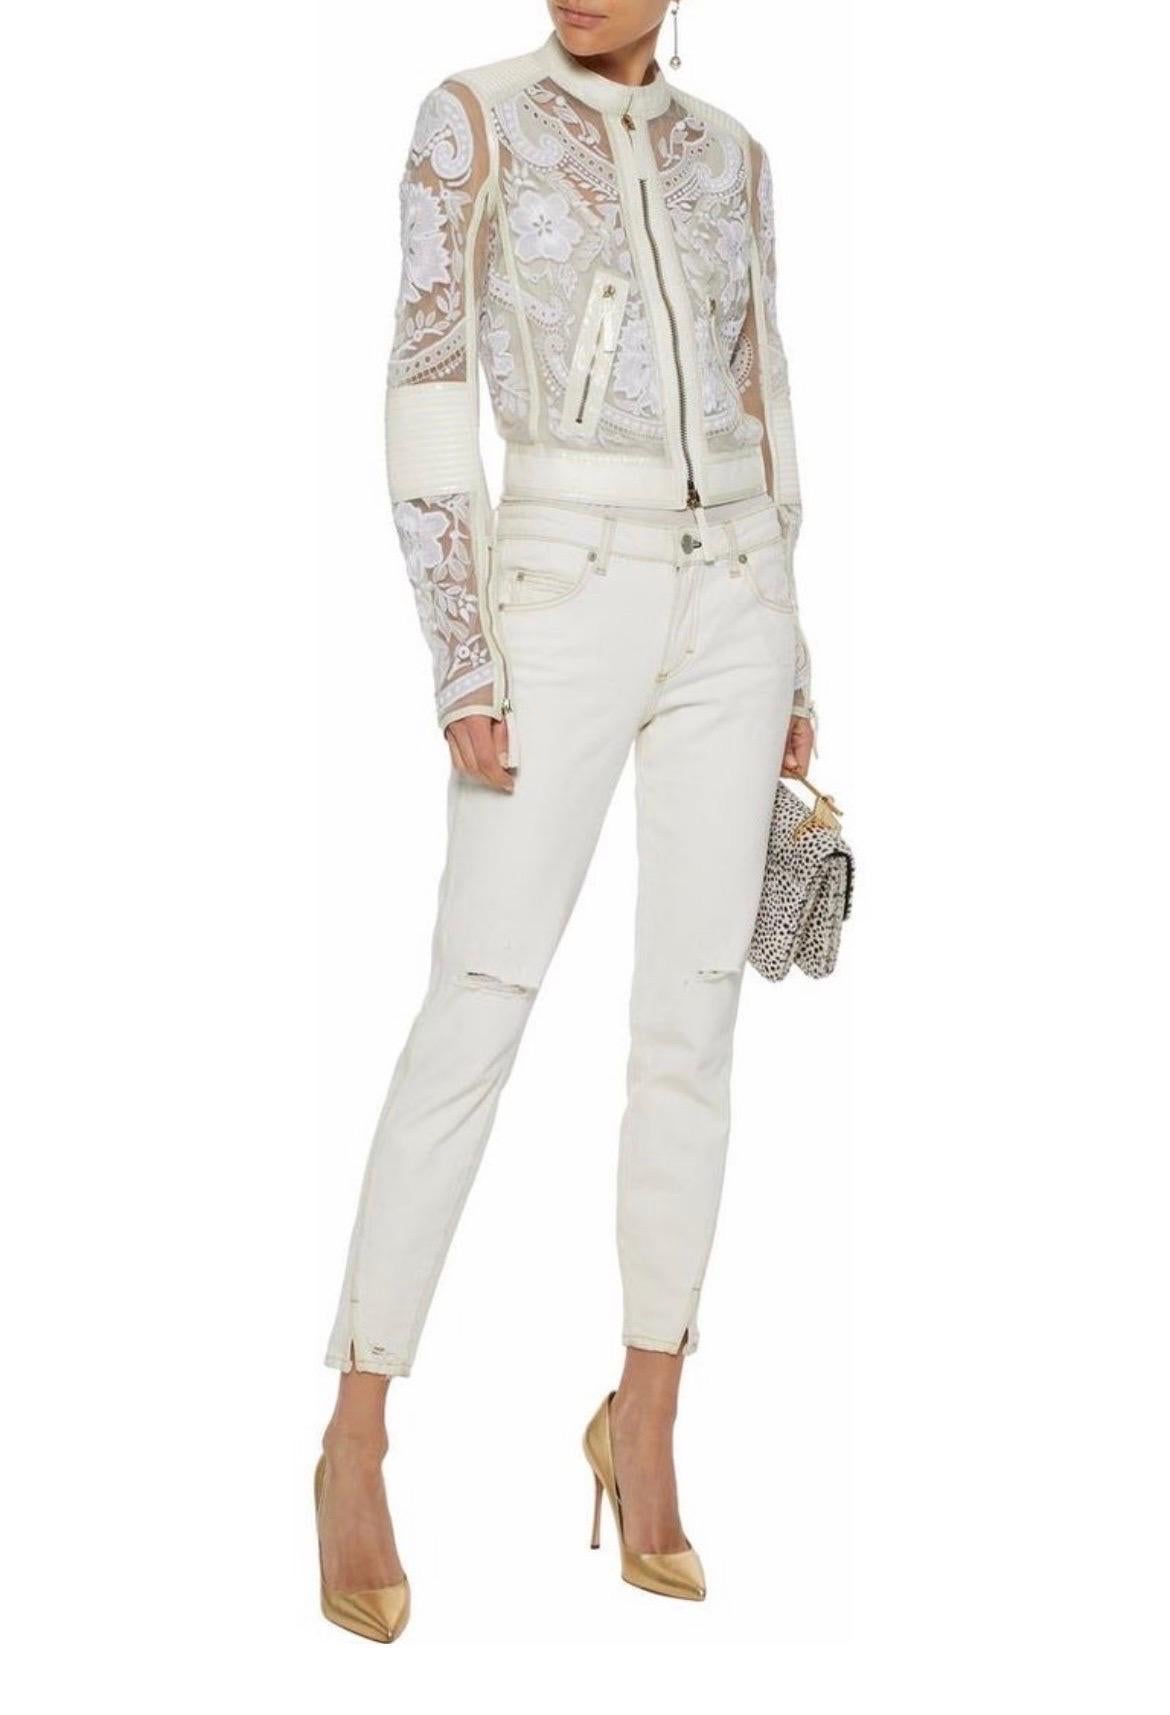 Roberto Cavalli
Biker Jacket 
Tulle Embroidered Leather trims two-way zip fastening through front 
Zipped cuffs 
Zip pockets 
Non-stretchy fabric 
Mid-weight fabric 
Made in Italy
Retail $13,710.00
IT Size 42 - US 6
New, with tags
